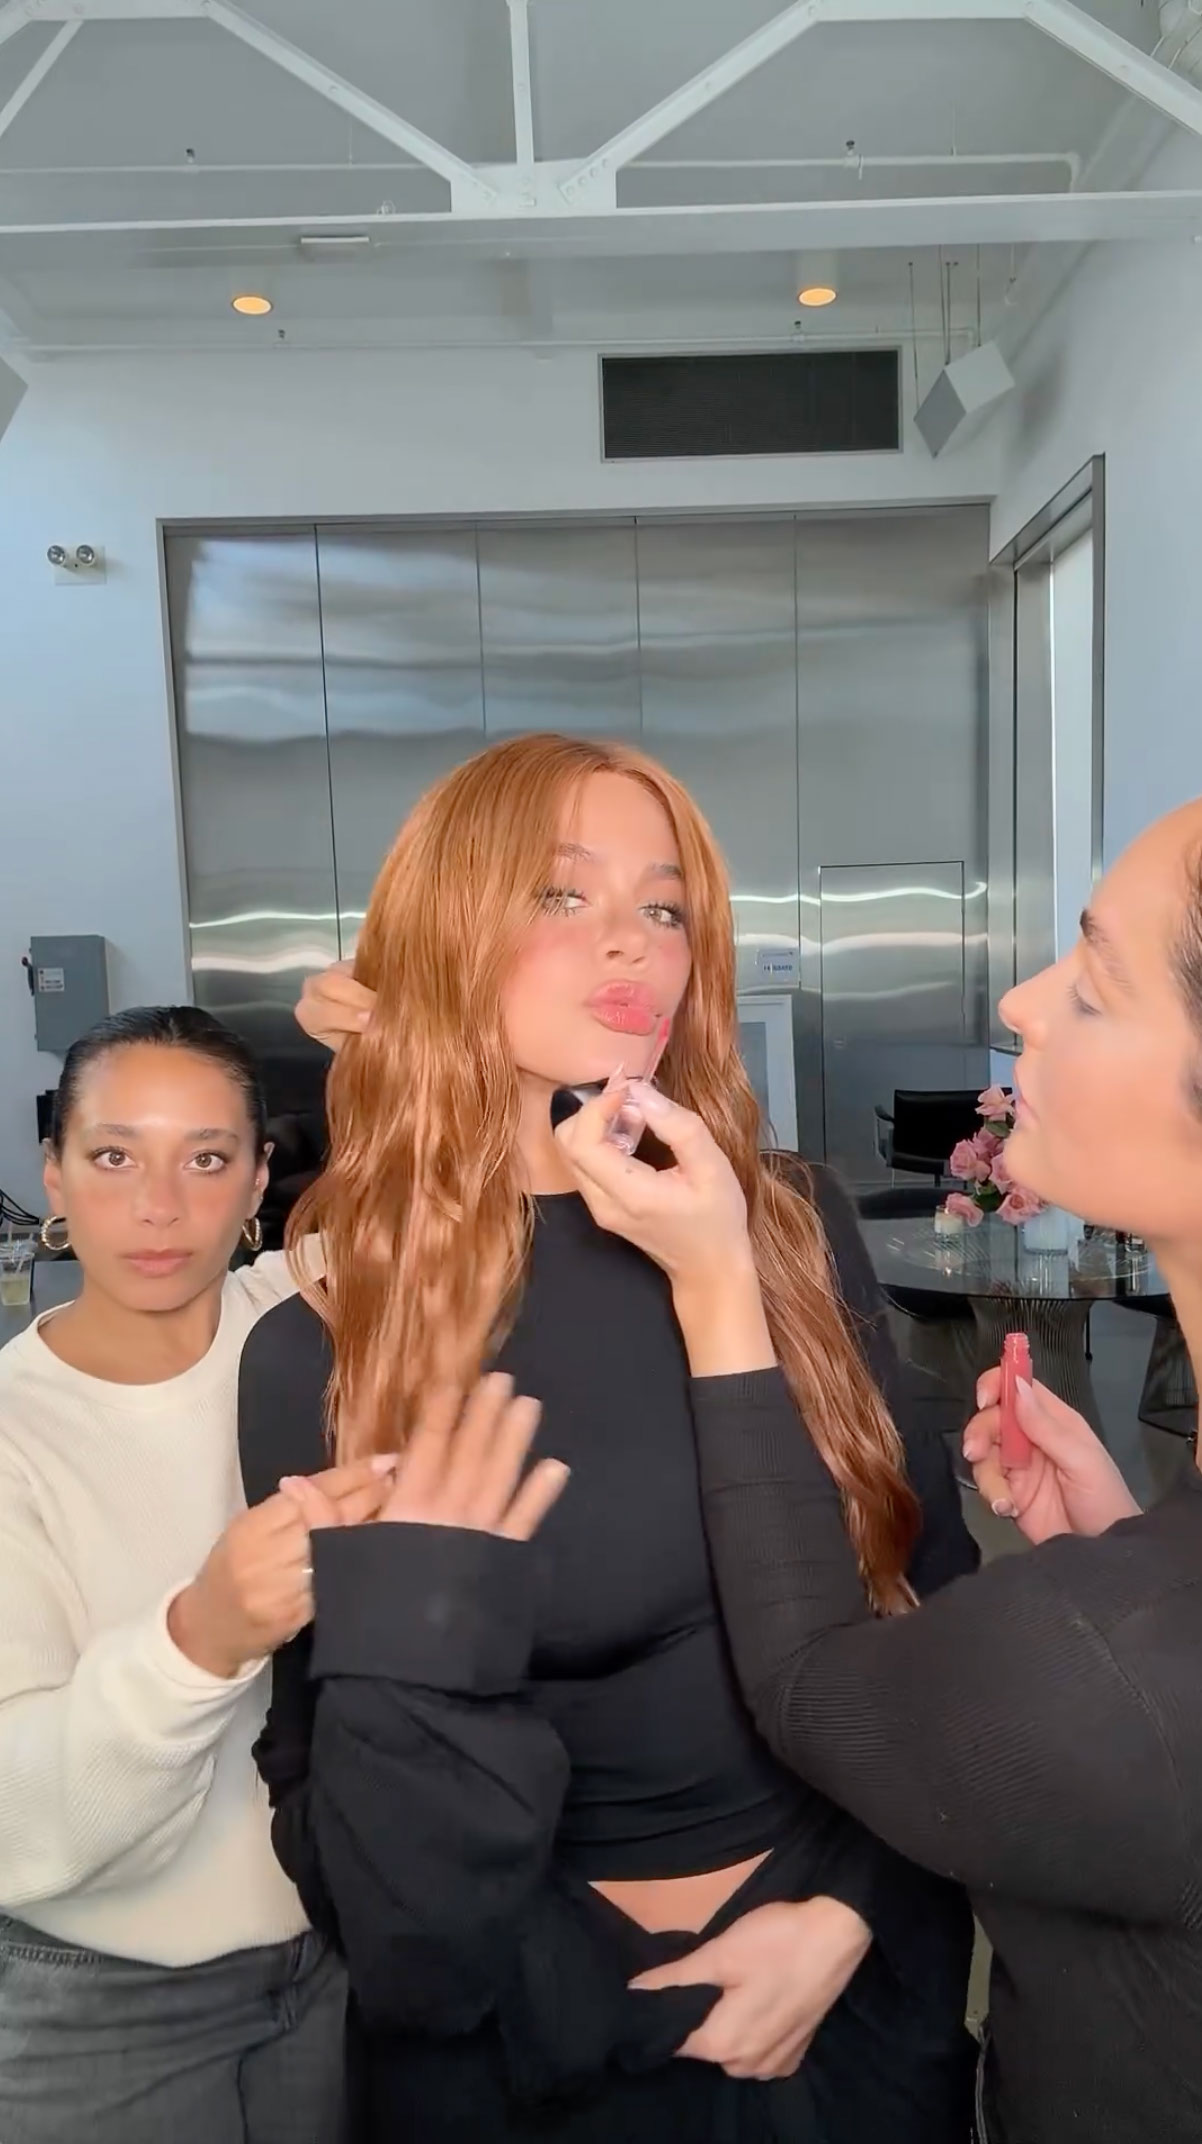 The video showed Khloe and her beauty team with a beauty filter